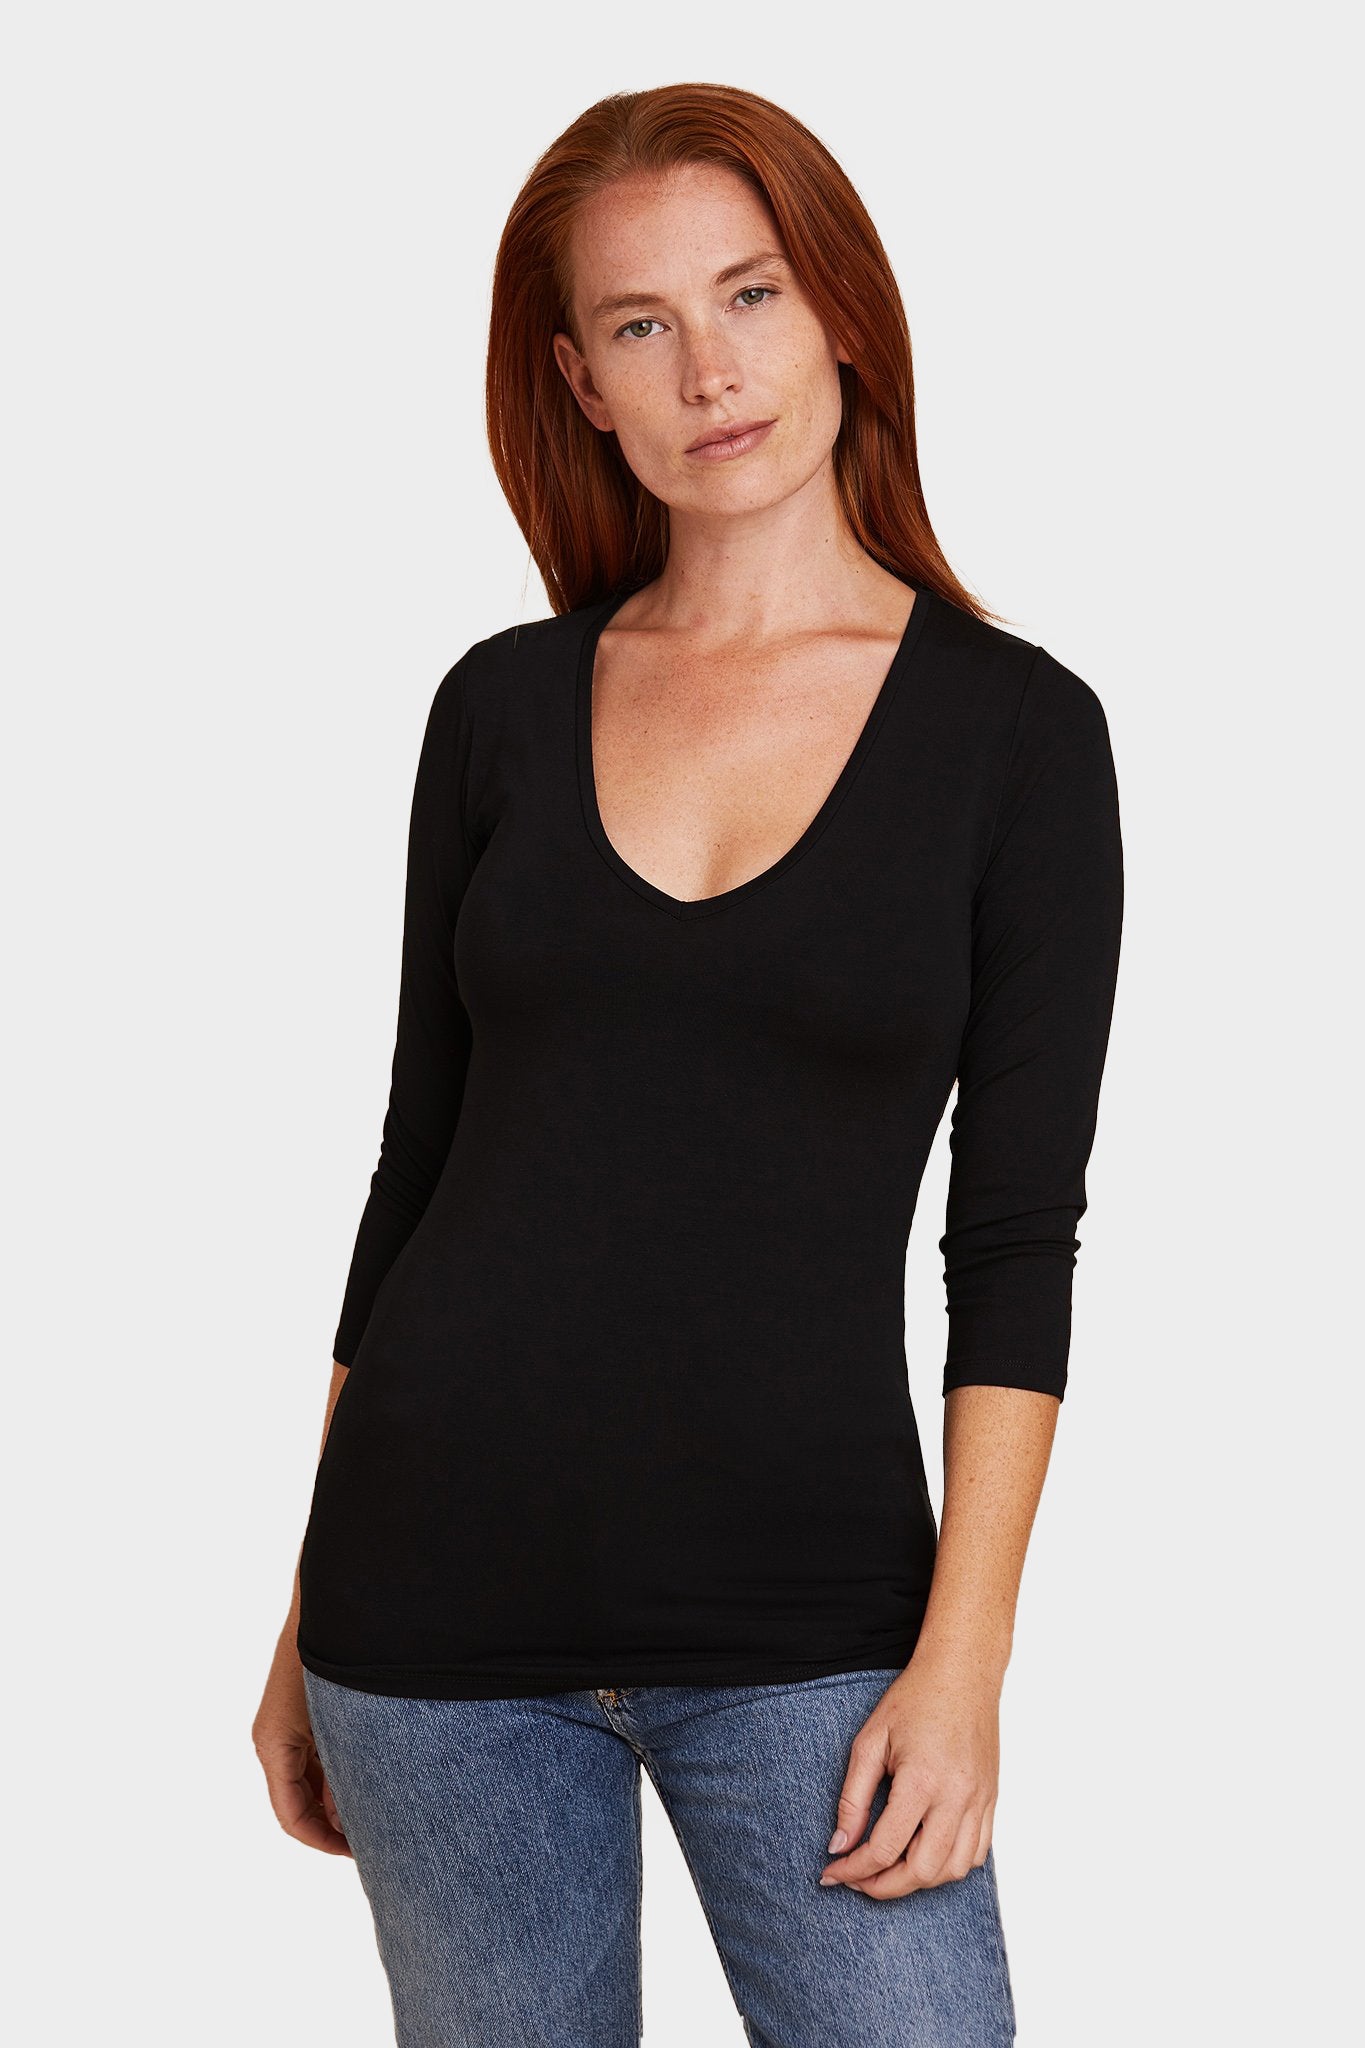 Soft Touch 3/4 Sleeve V-Neck - Majestic Filatures Official Site of North America